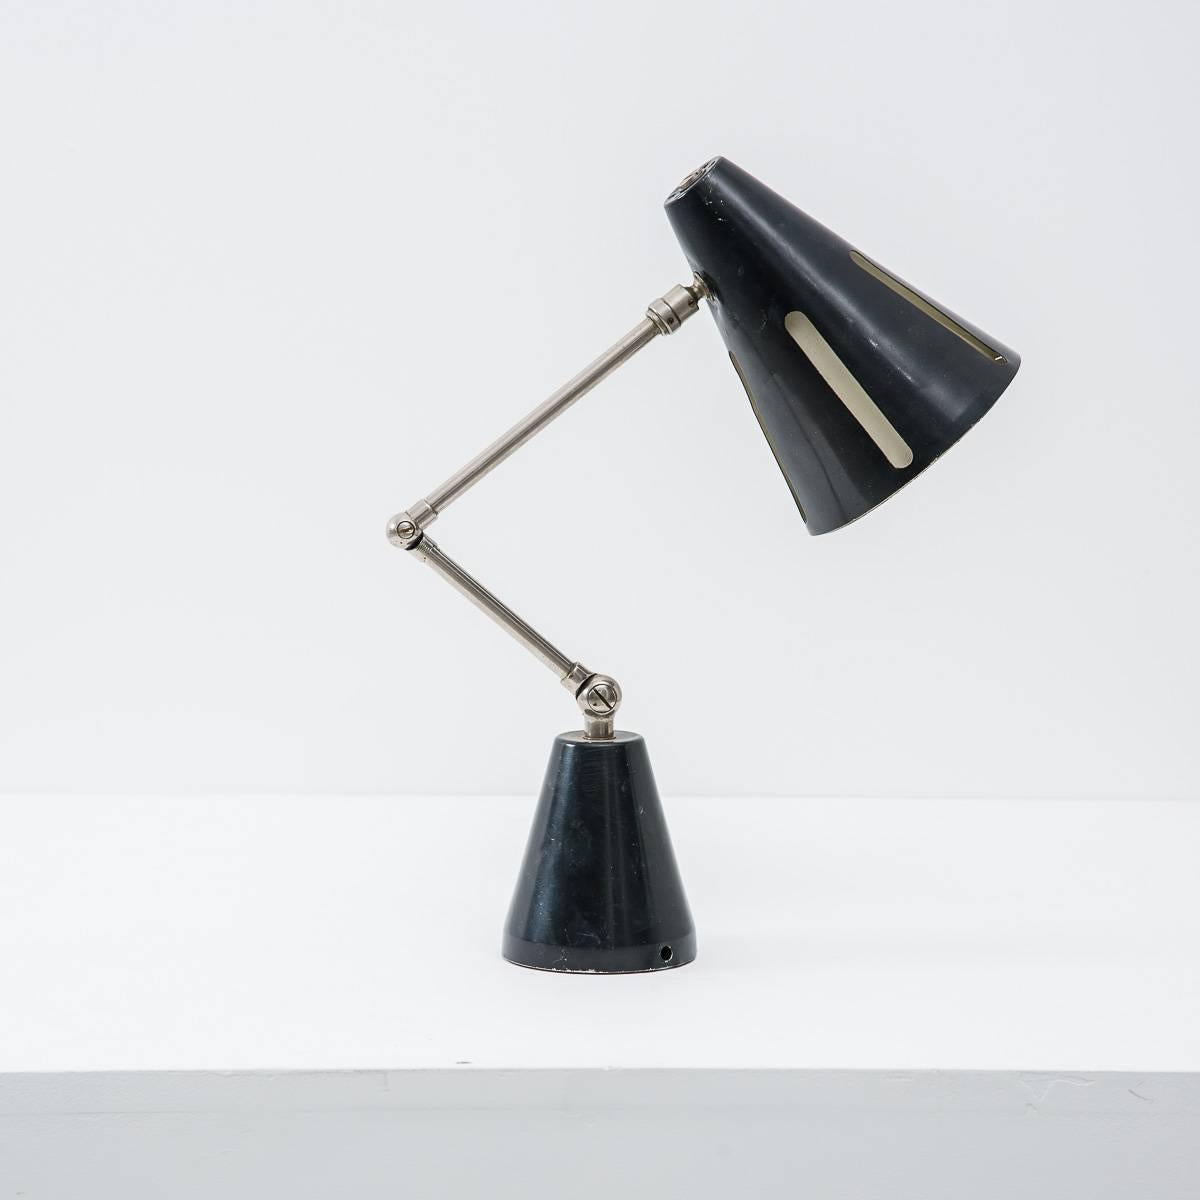 Black and nickel Midcentury Dutch desk lamp designed by lighting designer H.Th.J.A. Busquet for the producer Hala. Lovely lamp typical of the company and the Dutch modern Minimalist aesthetic.
Good rewired condition.

Measures: W 9 D 9 H